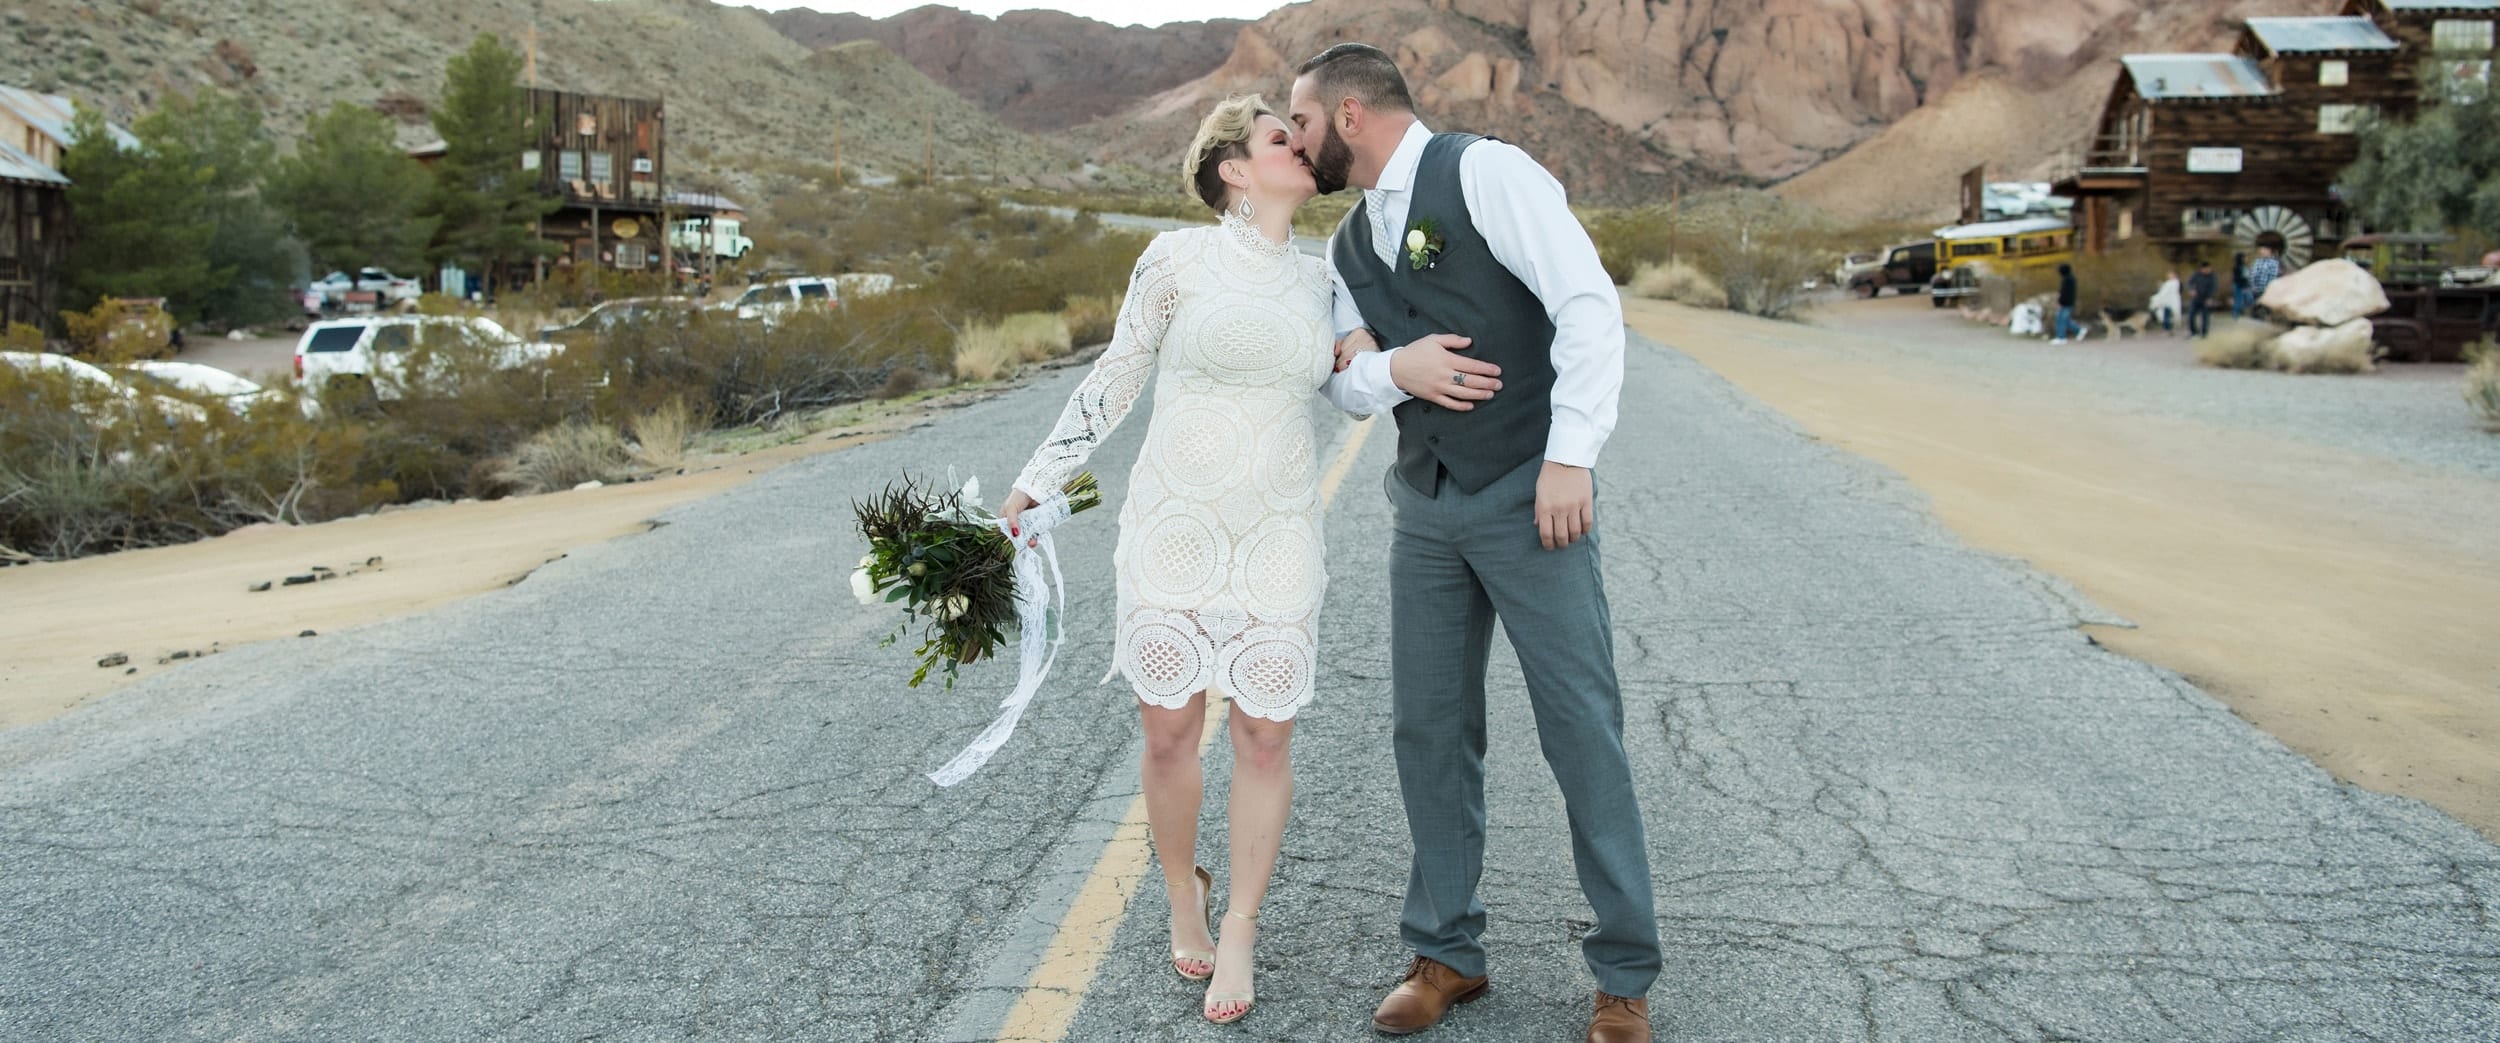 Bride and groom kissing in the middle of a deserted road.